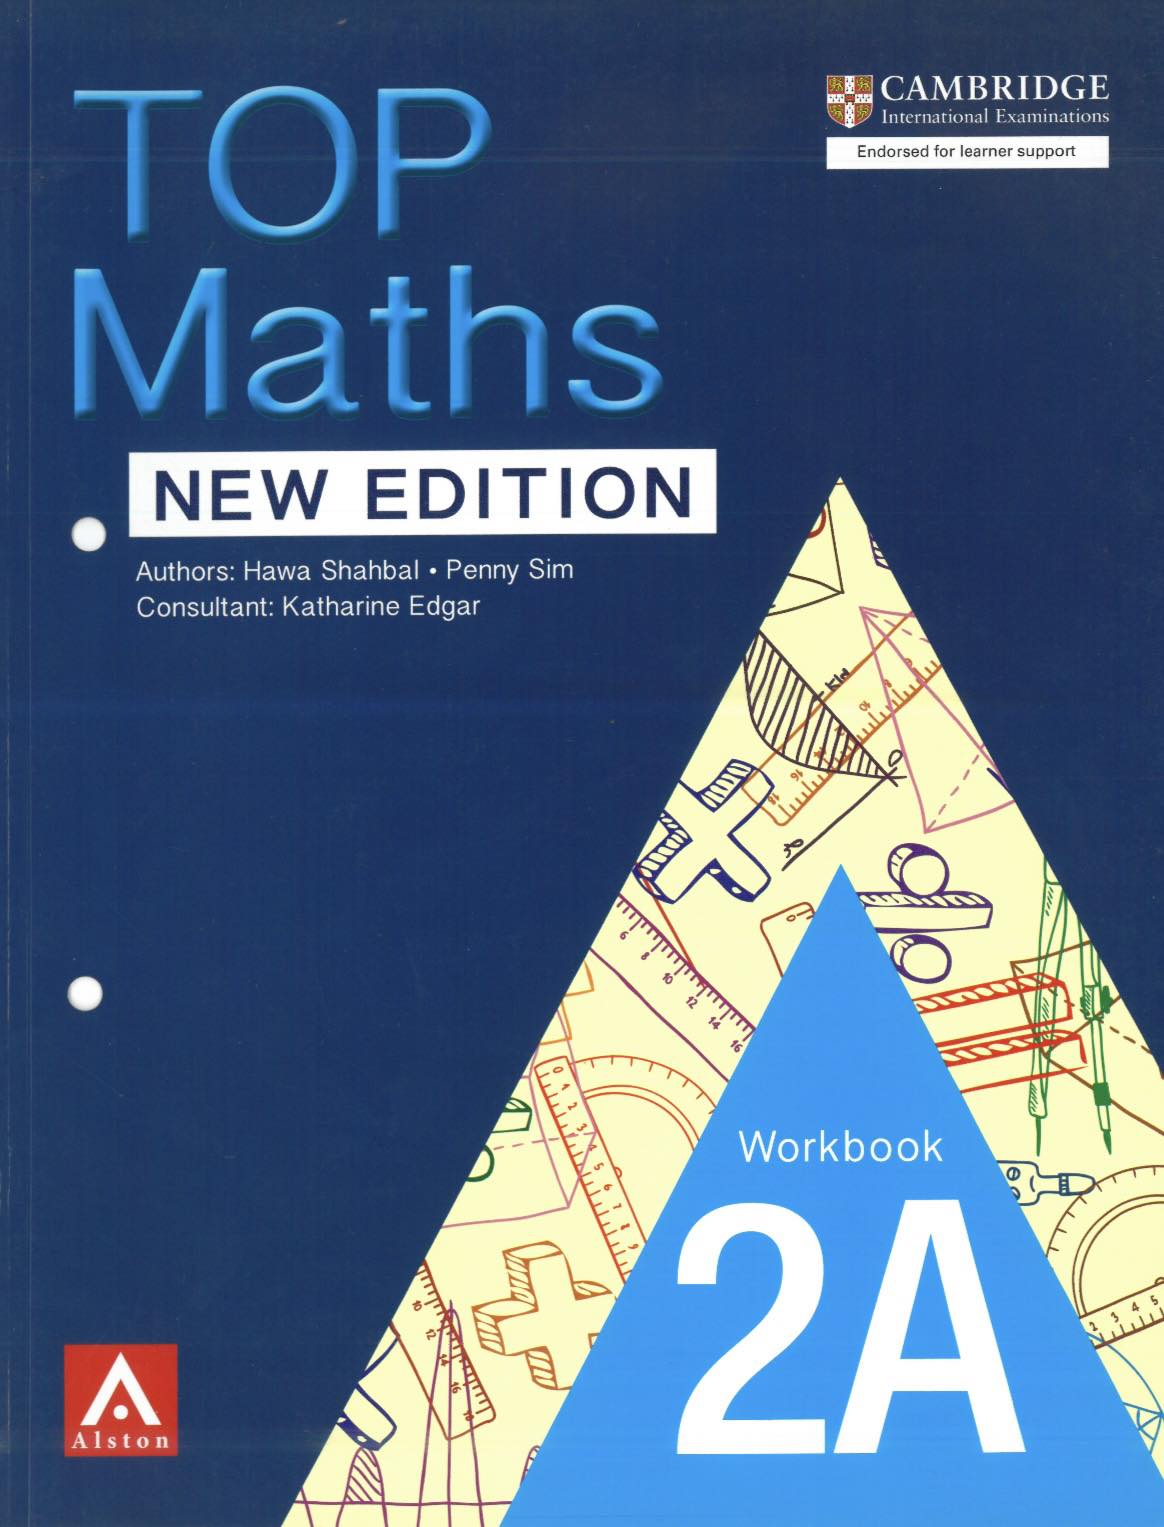 TOP Maths Stage 2 Textbook and Workbook